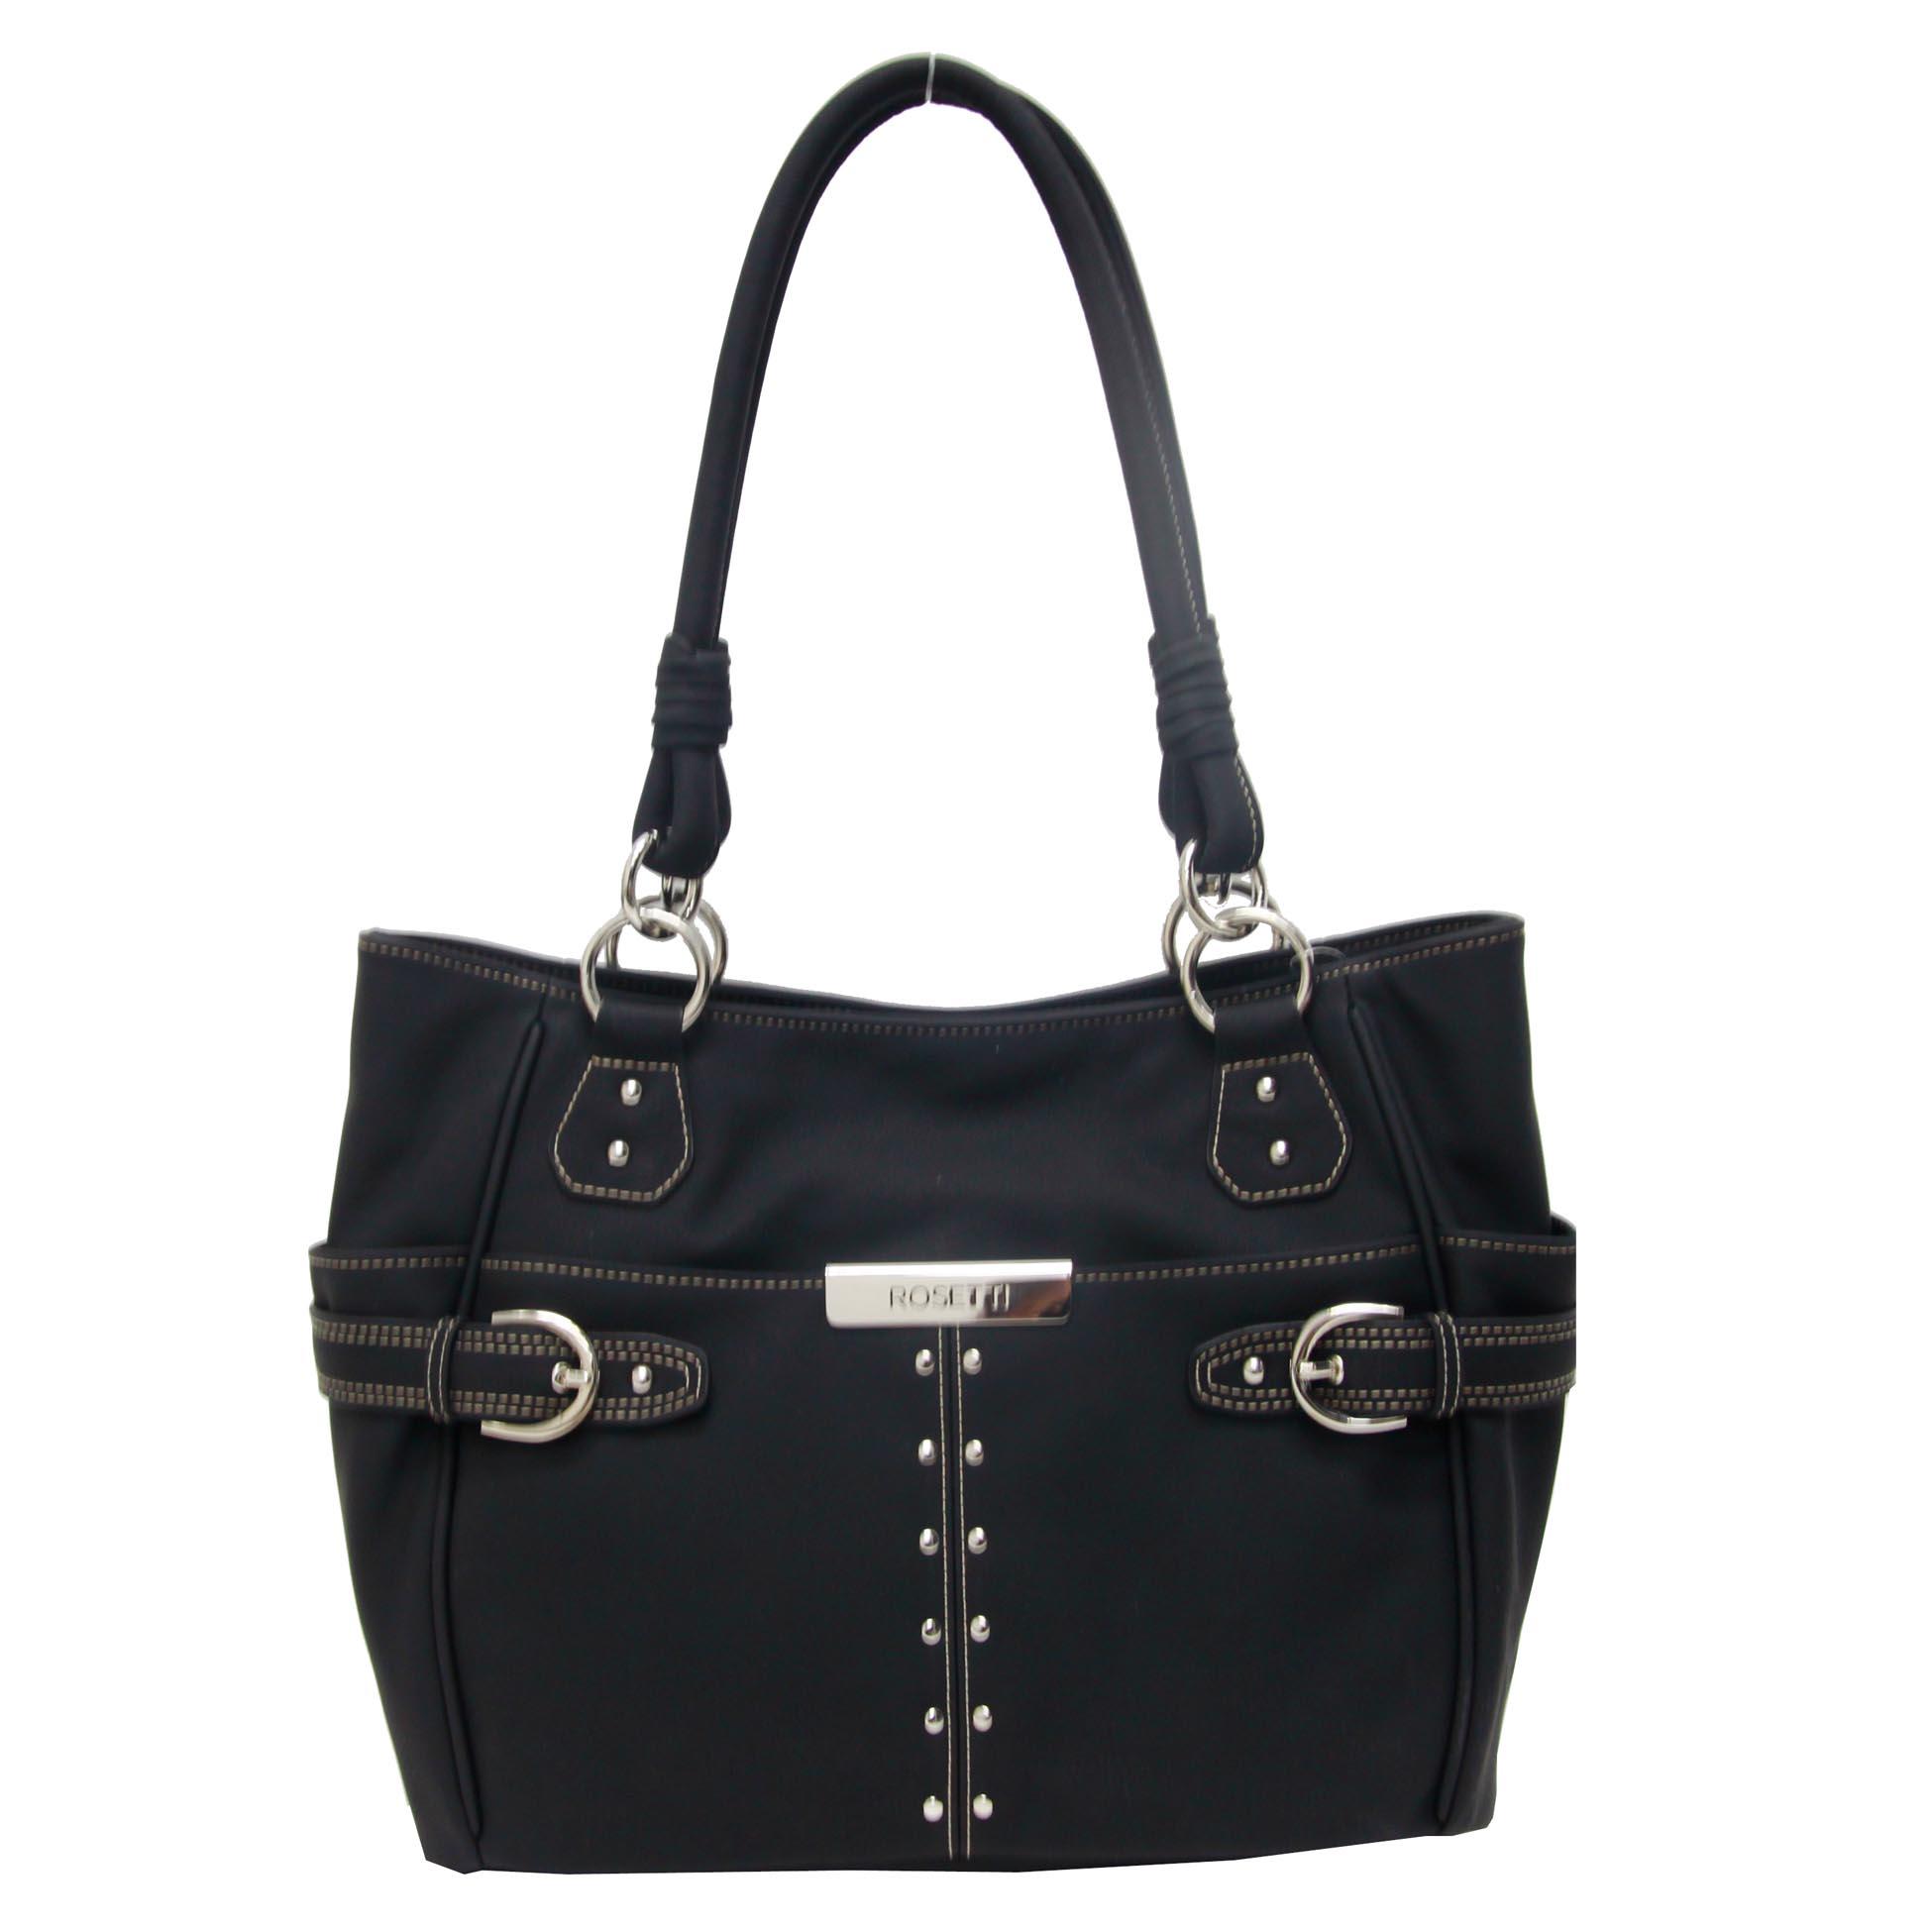 Rosetti Women's Ring in the Tides Tote